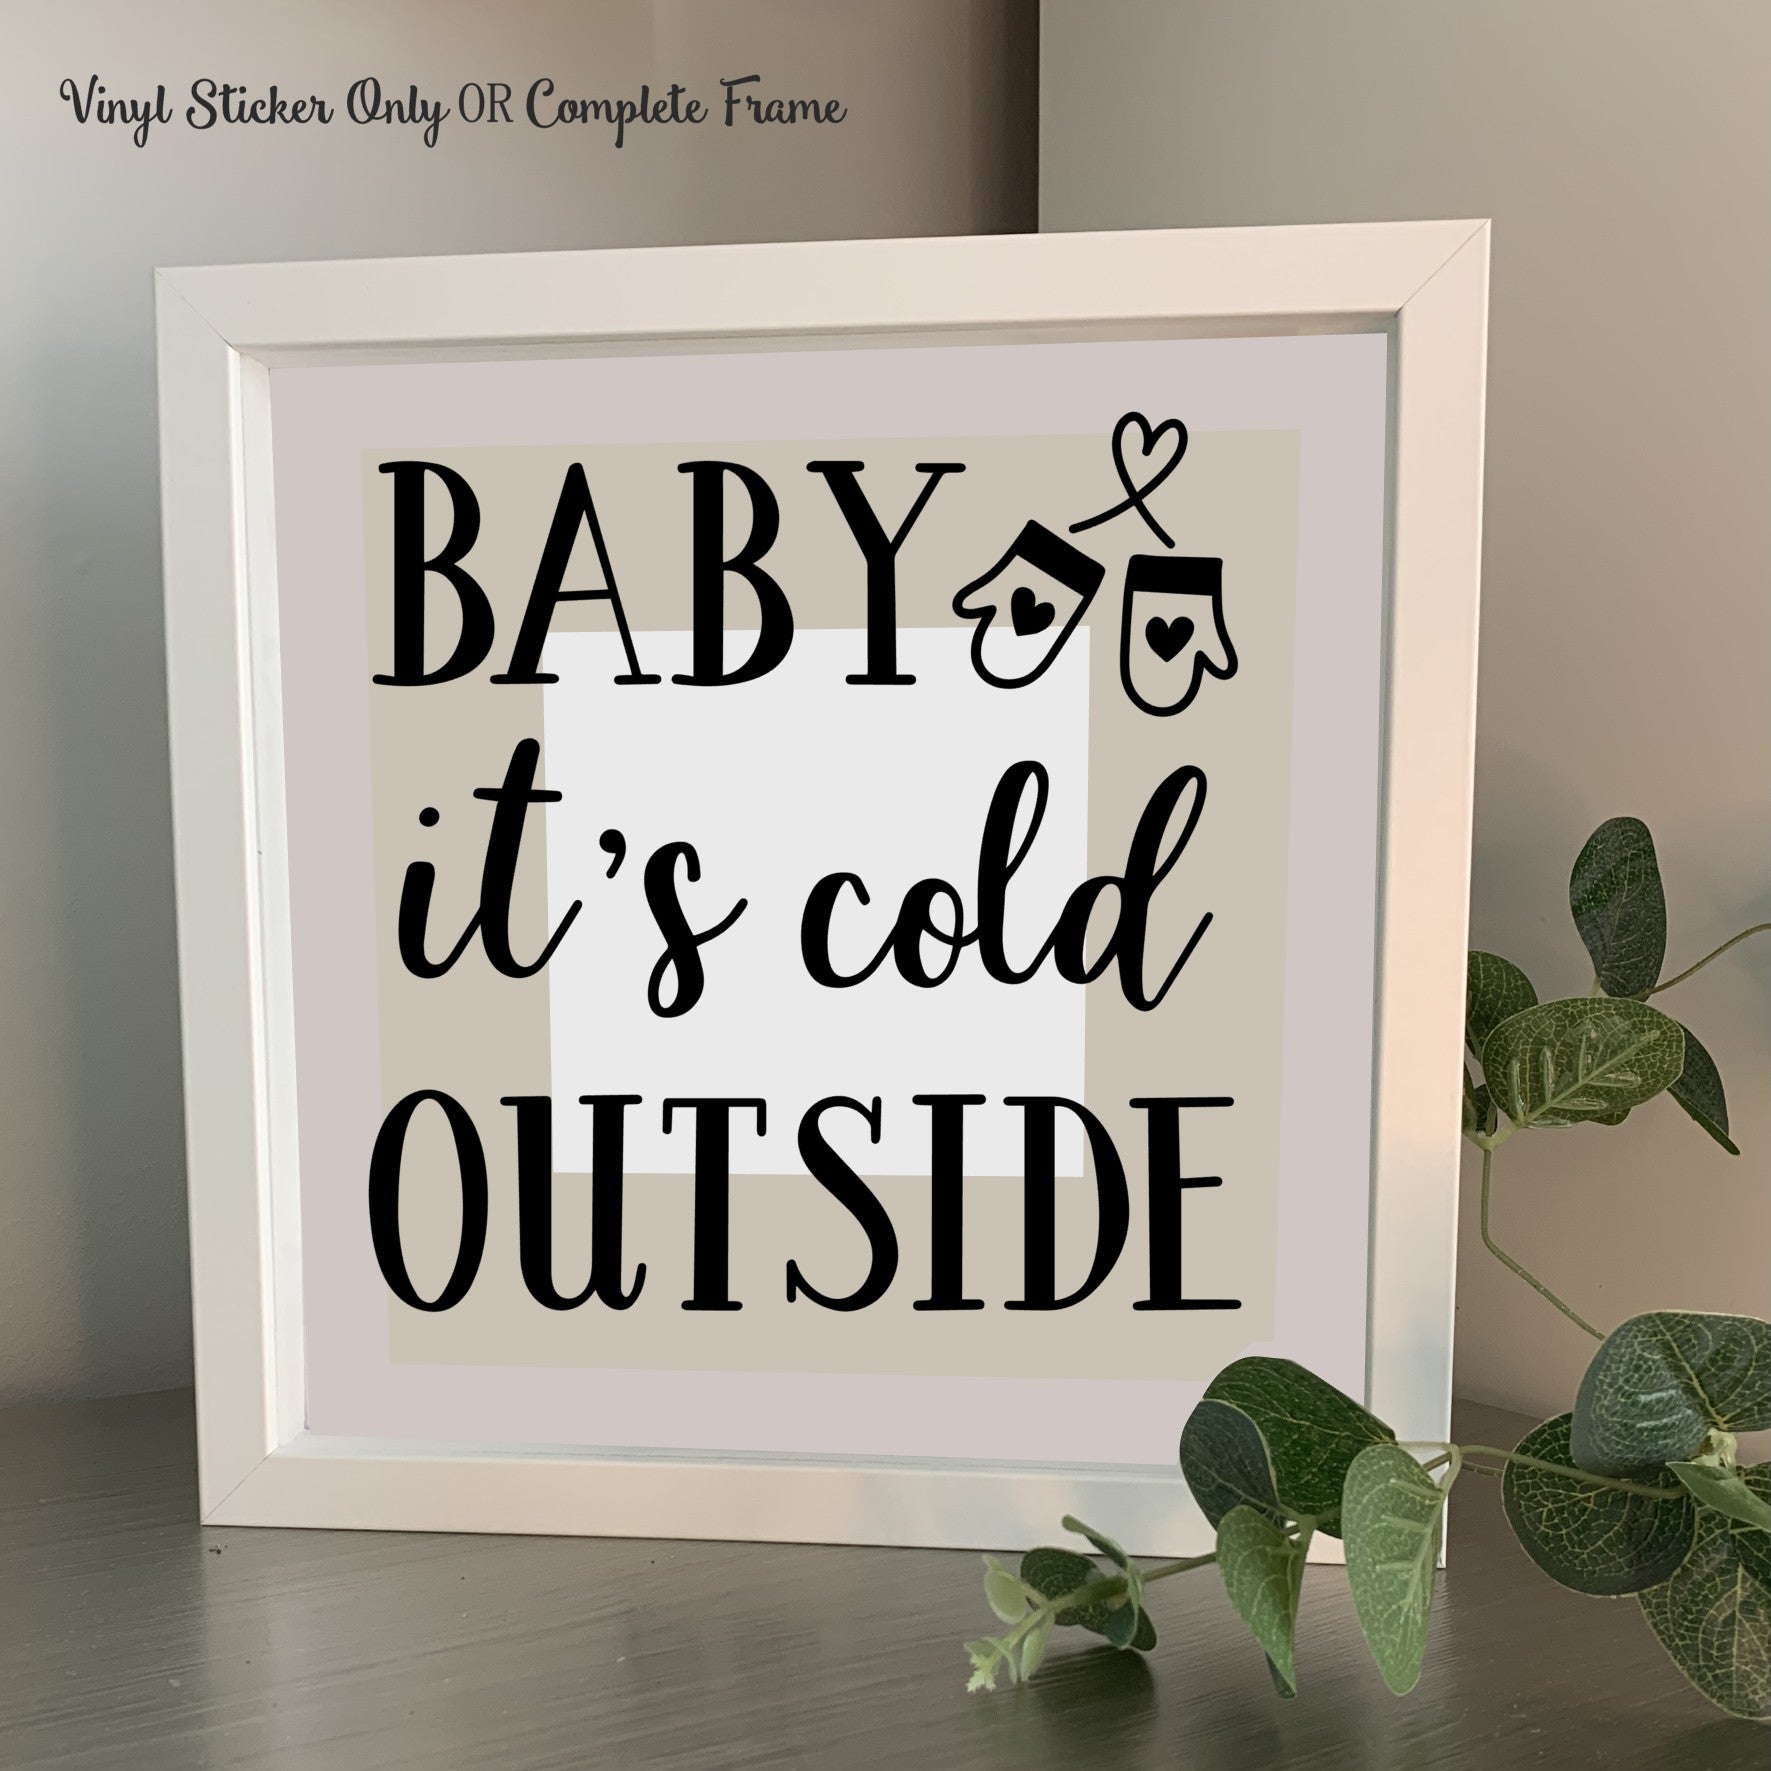 Baby its cold outside sticker